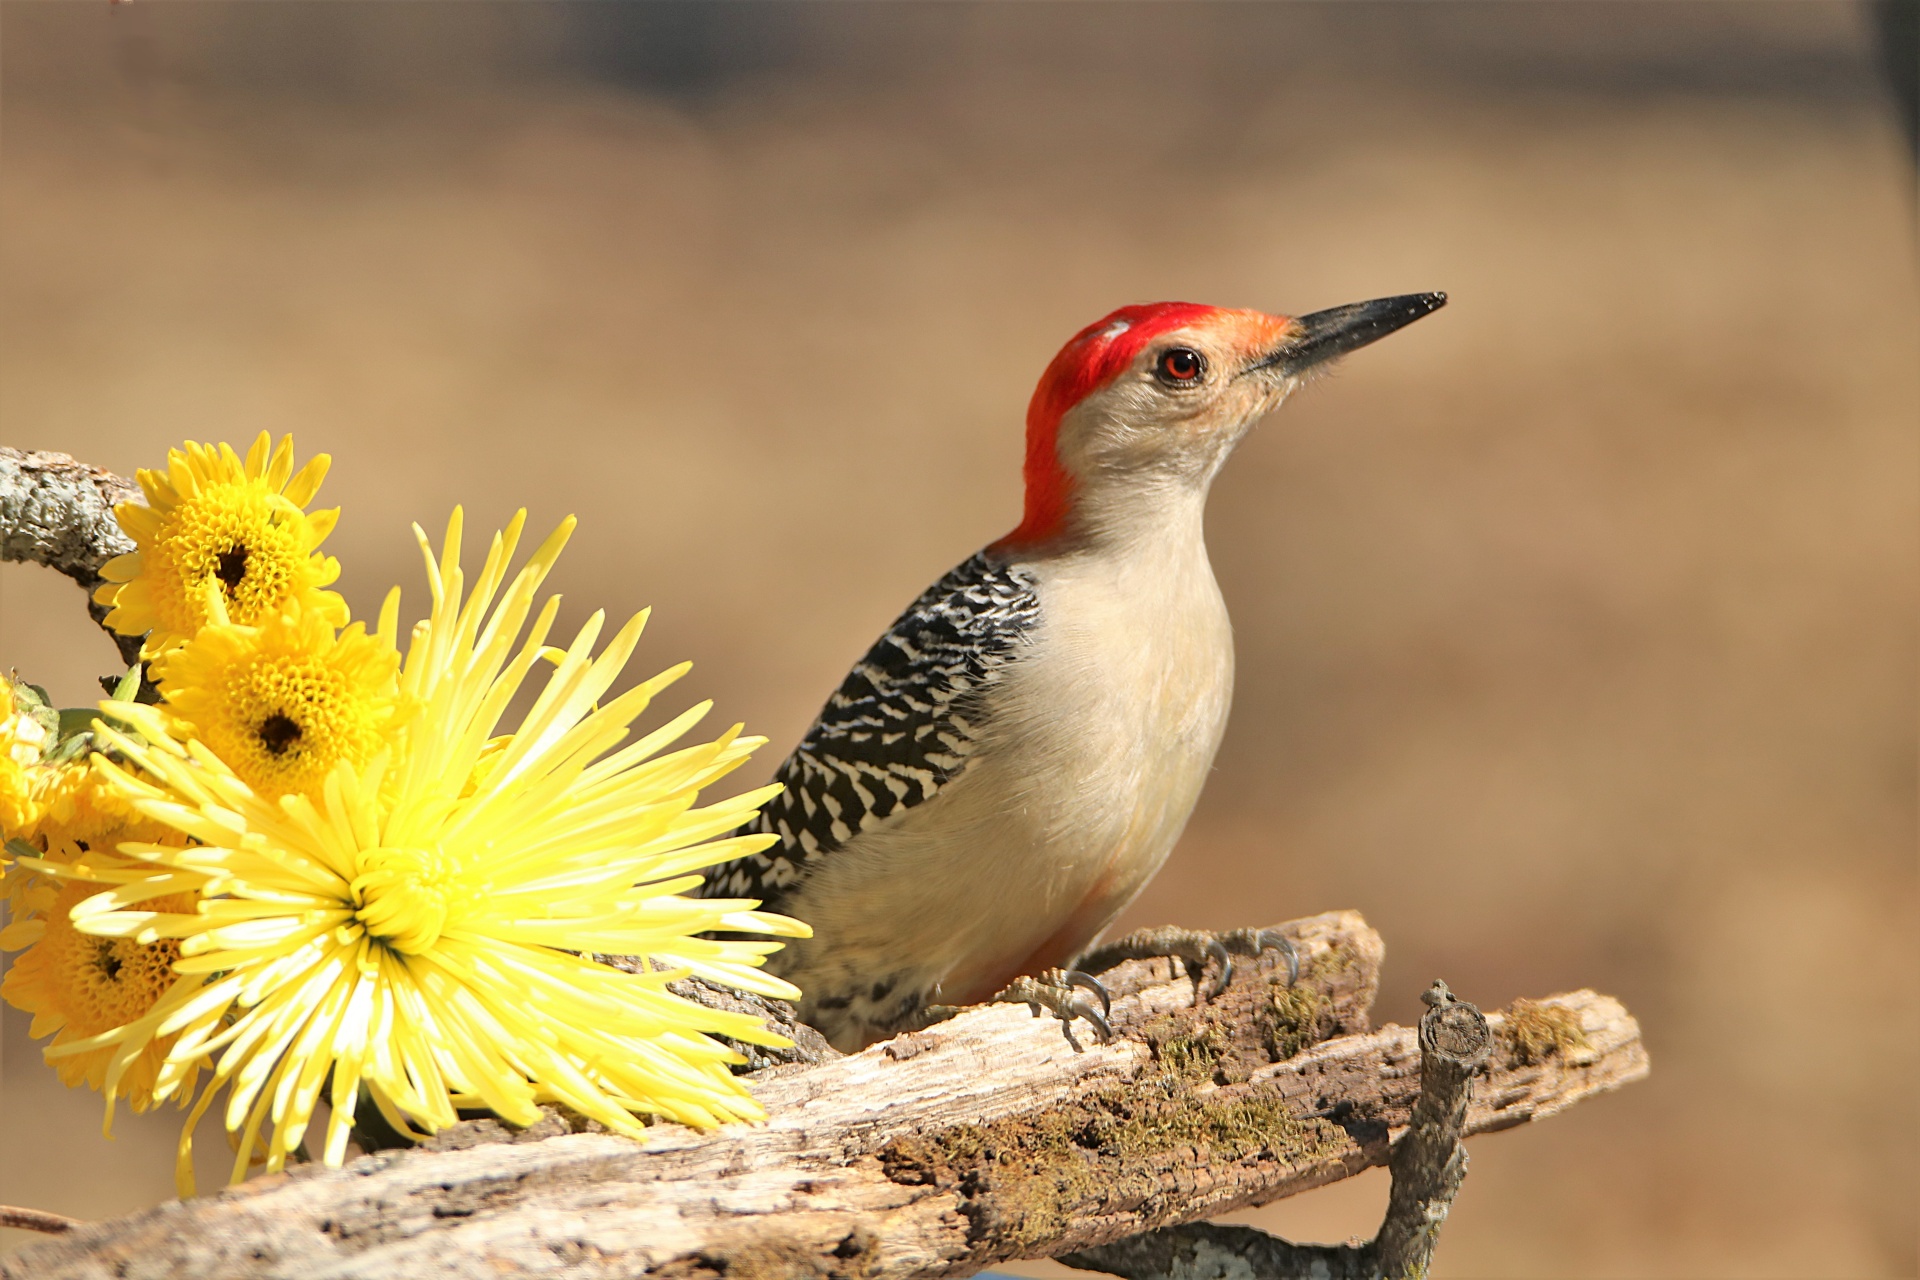 Close-up of a male red-bellied woodpecker, perched on a moss covered tree branch with yellow chrysanthemums beside him, on a blurred brown background.